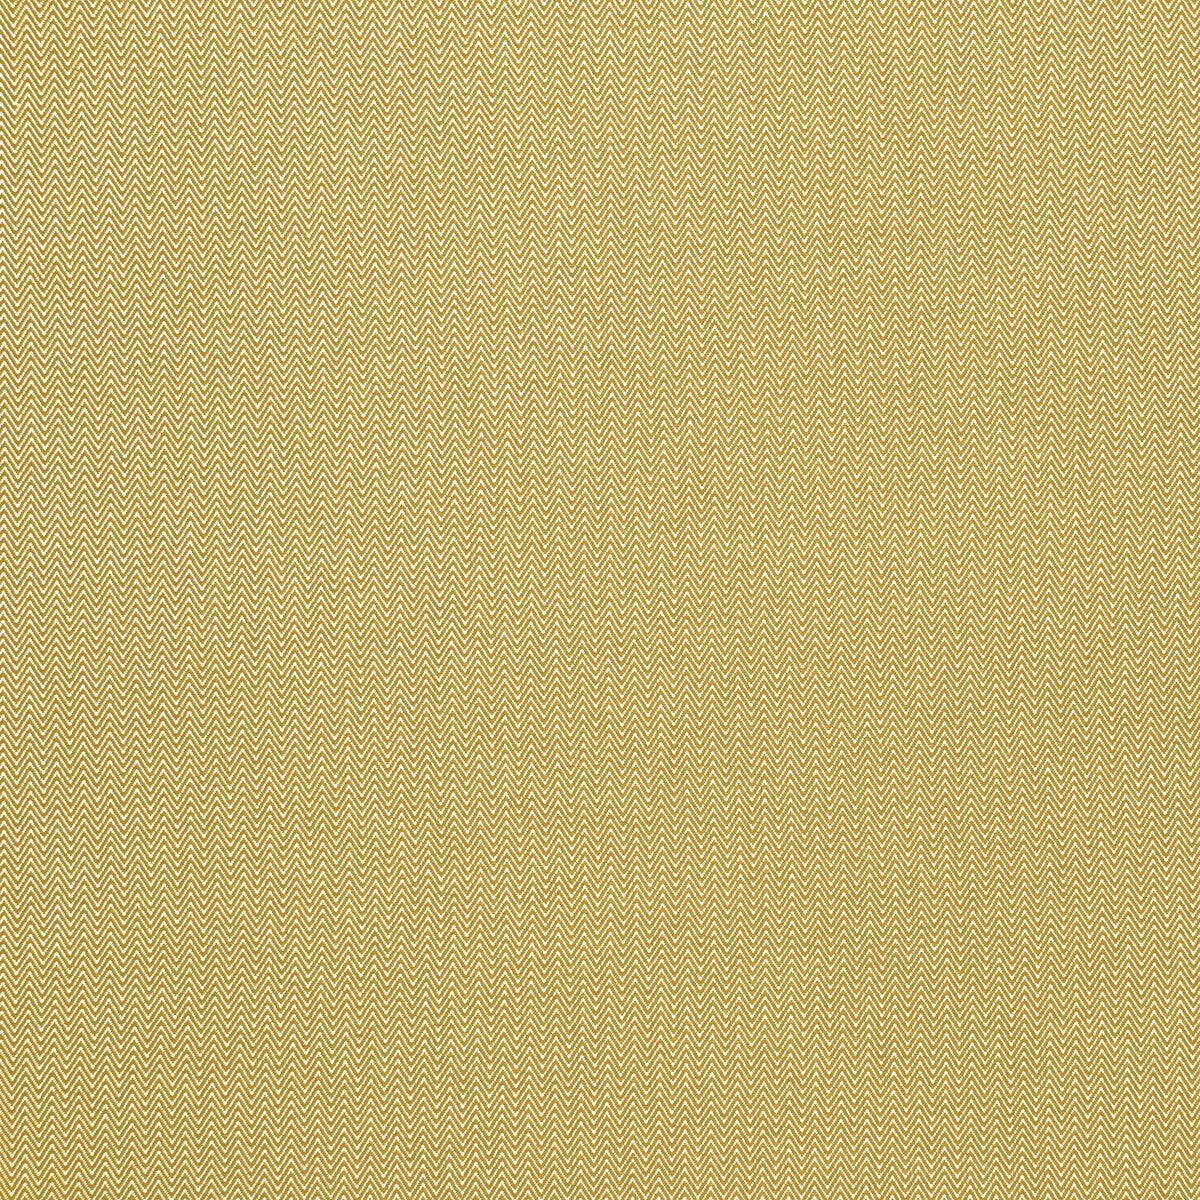 Donald fabric in amarillo color - pattern GDT5384.6.0 - by Gaston y Daniela in the Gaston Africalia collection